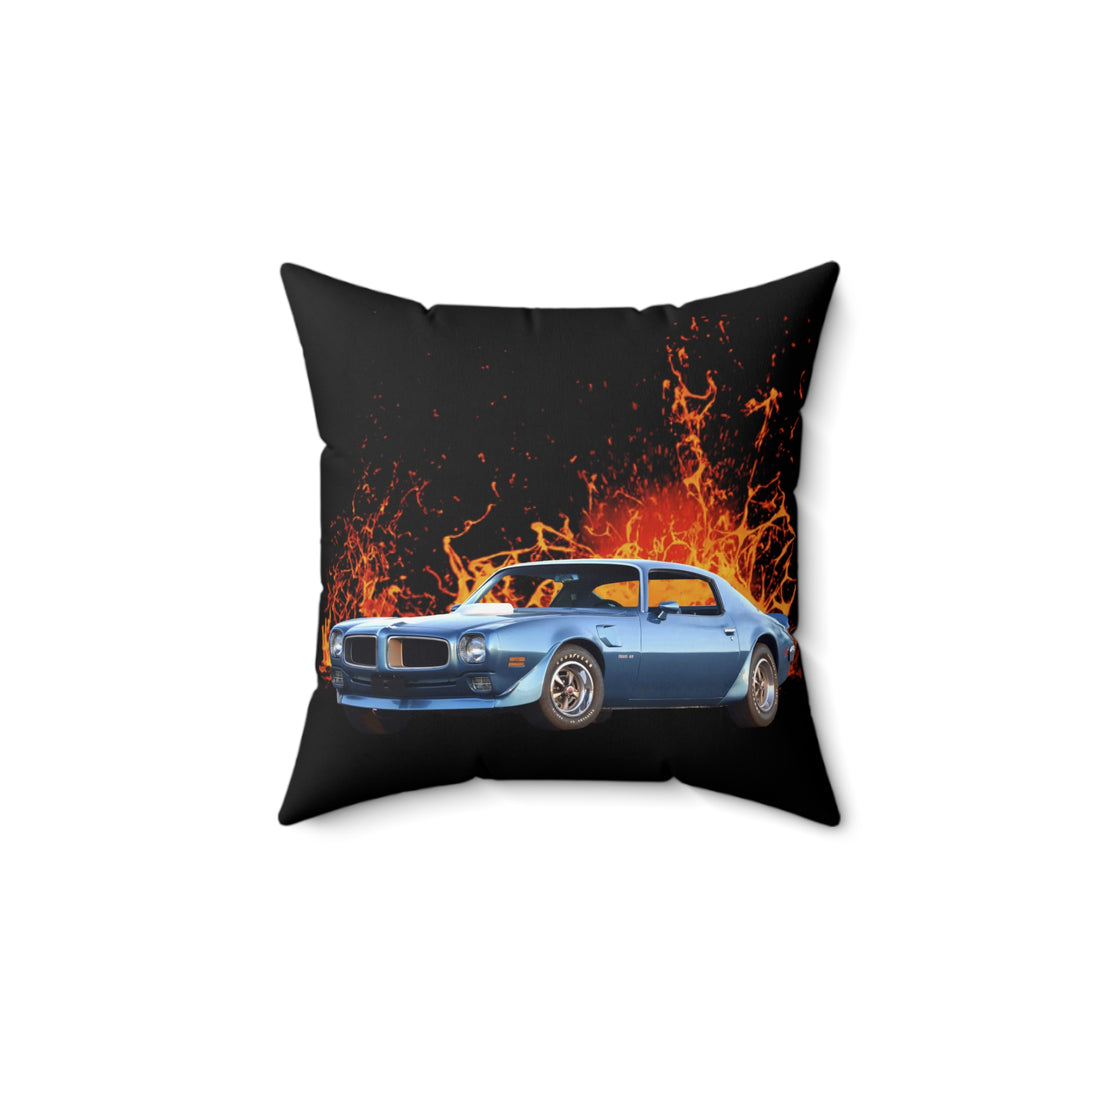 1970 Firebird Trans AM in our lava series Spun Polyester Square Pillow